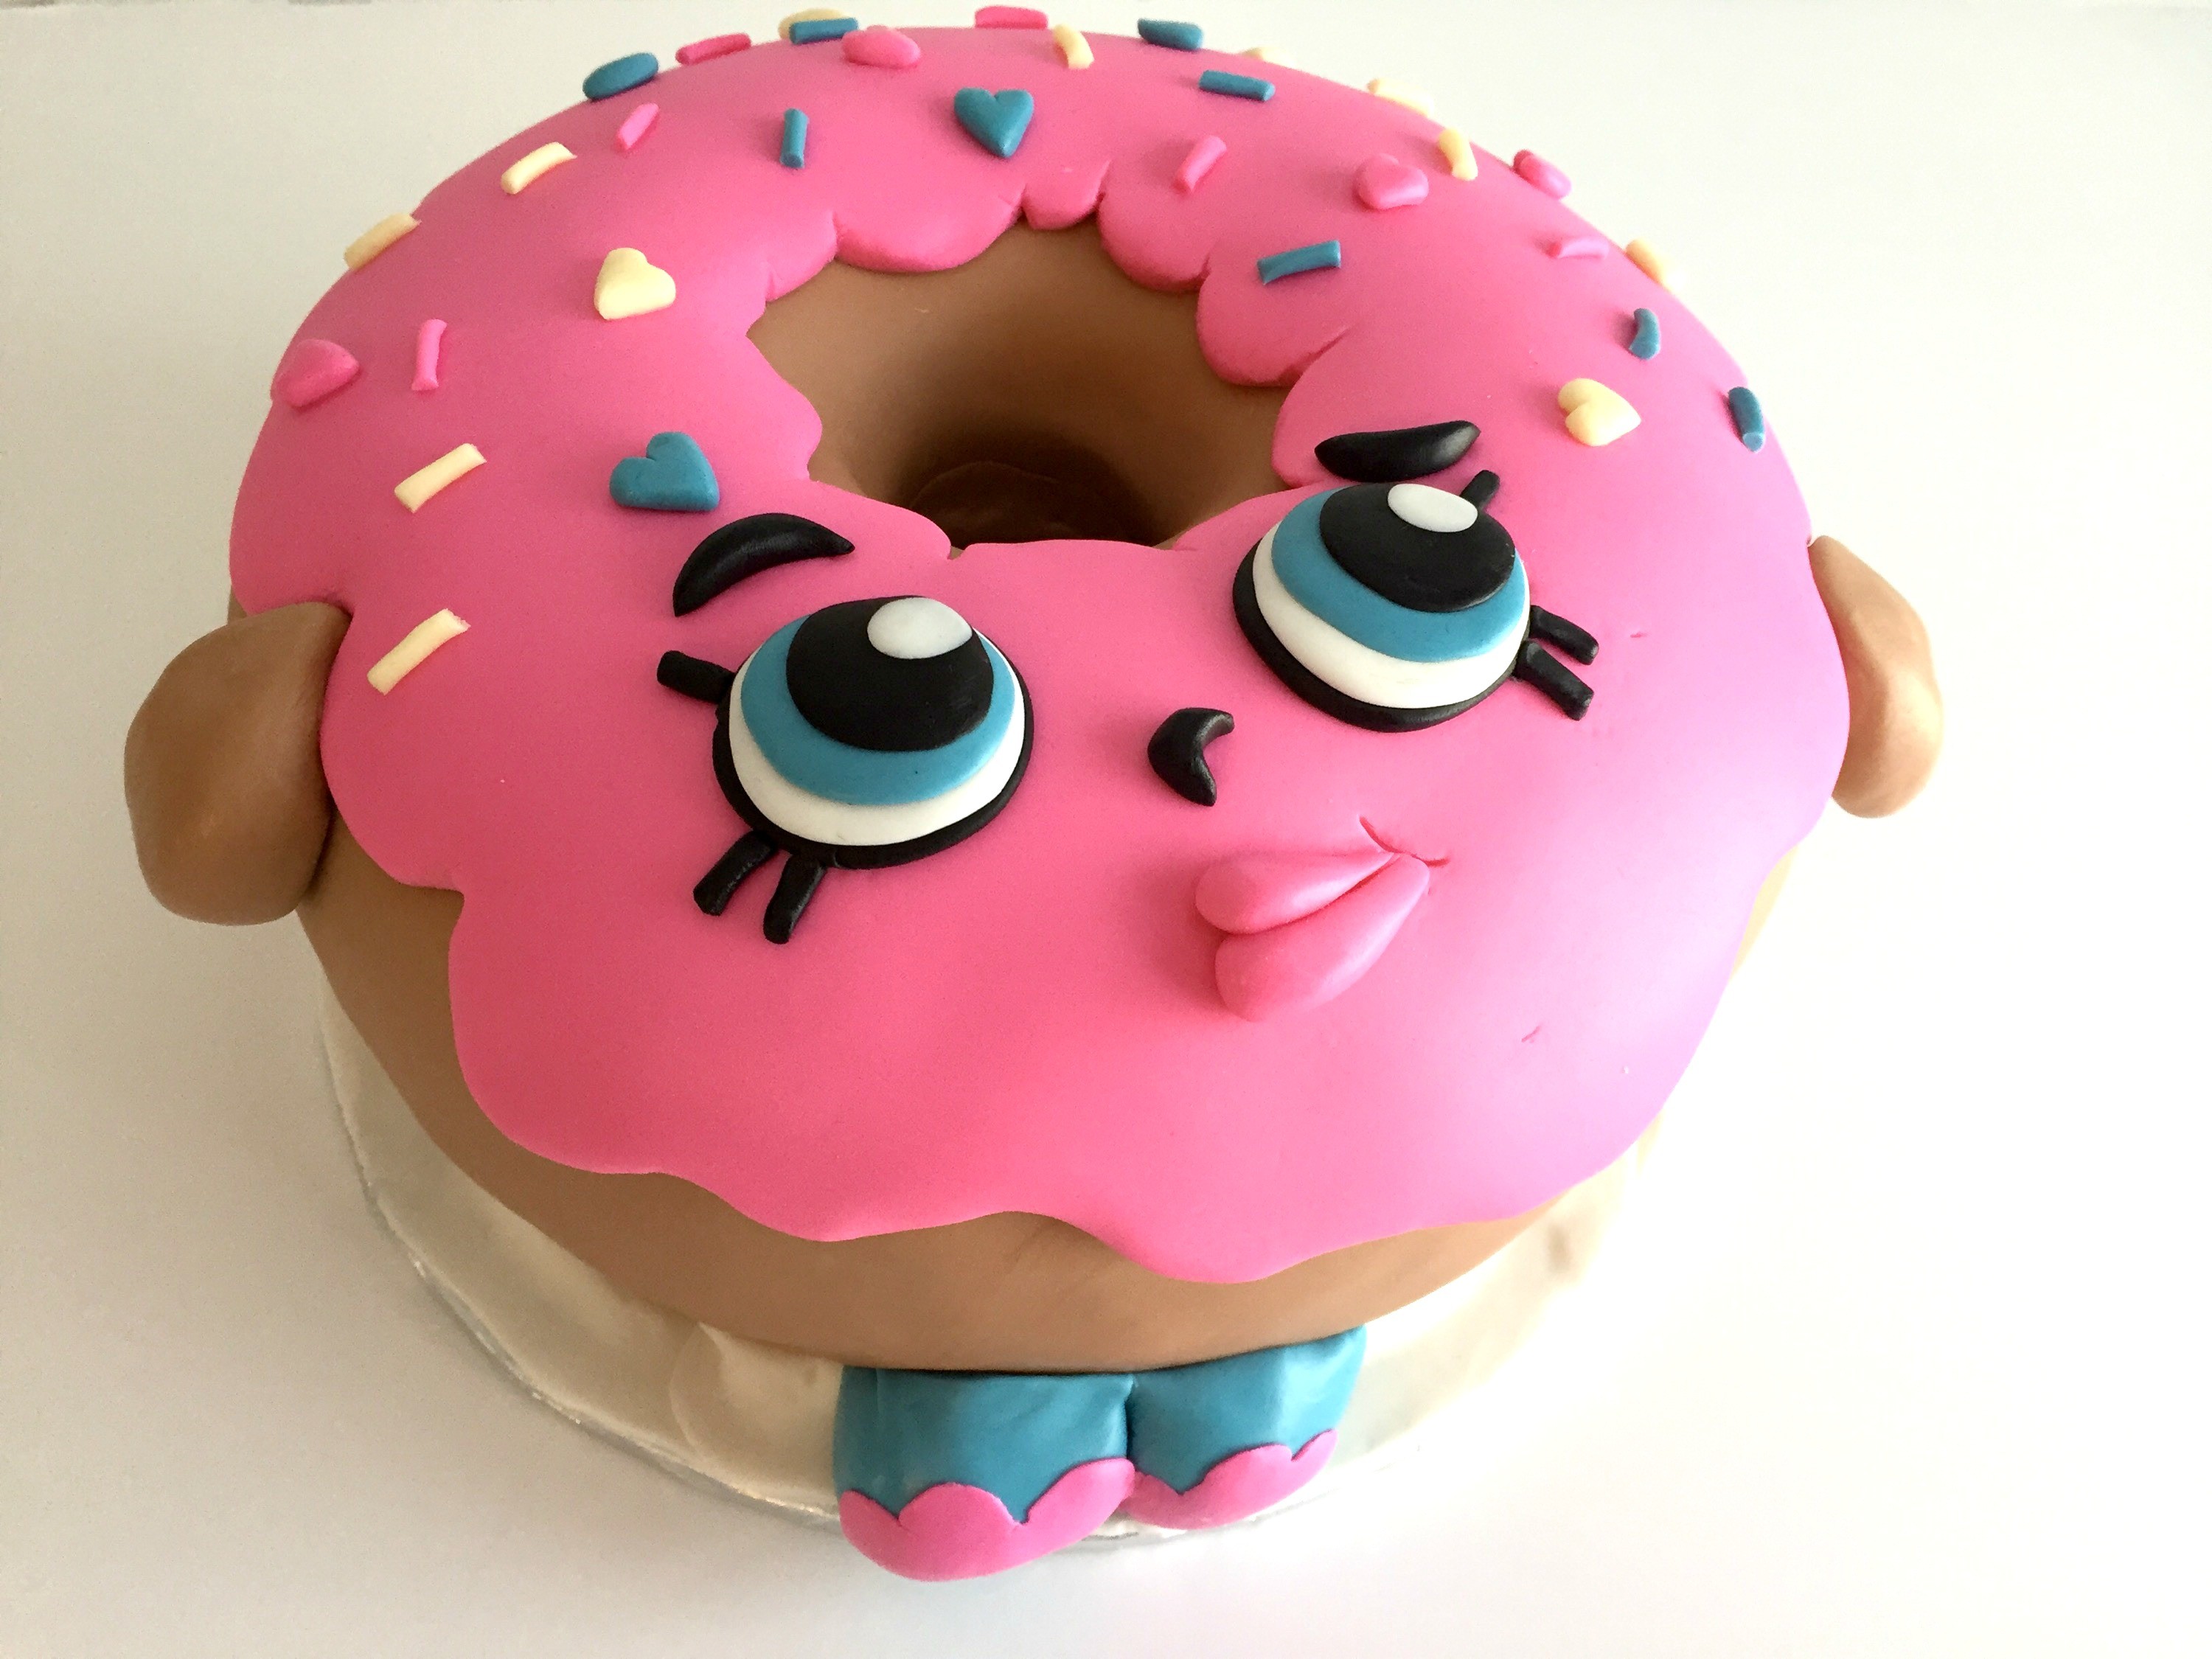 10 Adorable Shopkins Cakes That Will Wow Your Guests Pretty My Party Design A Birthday Cake Online For Free